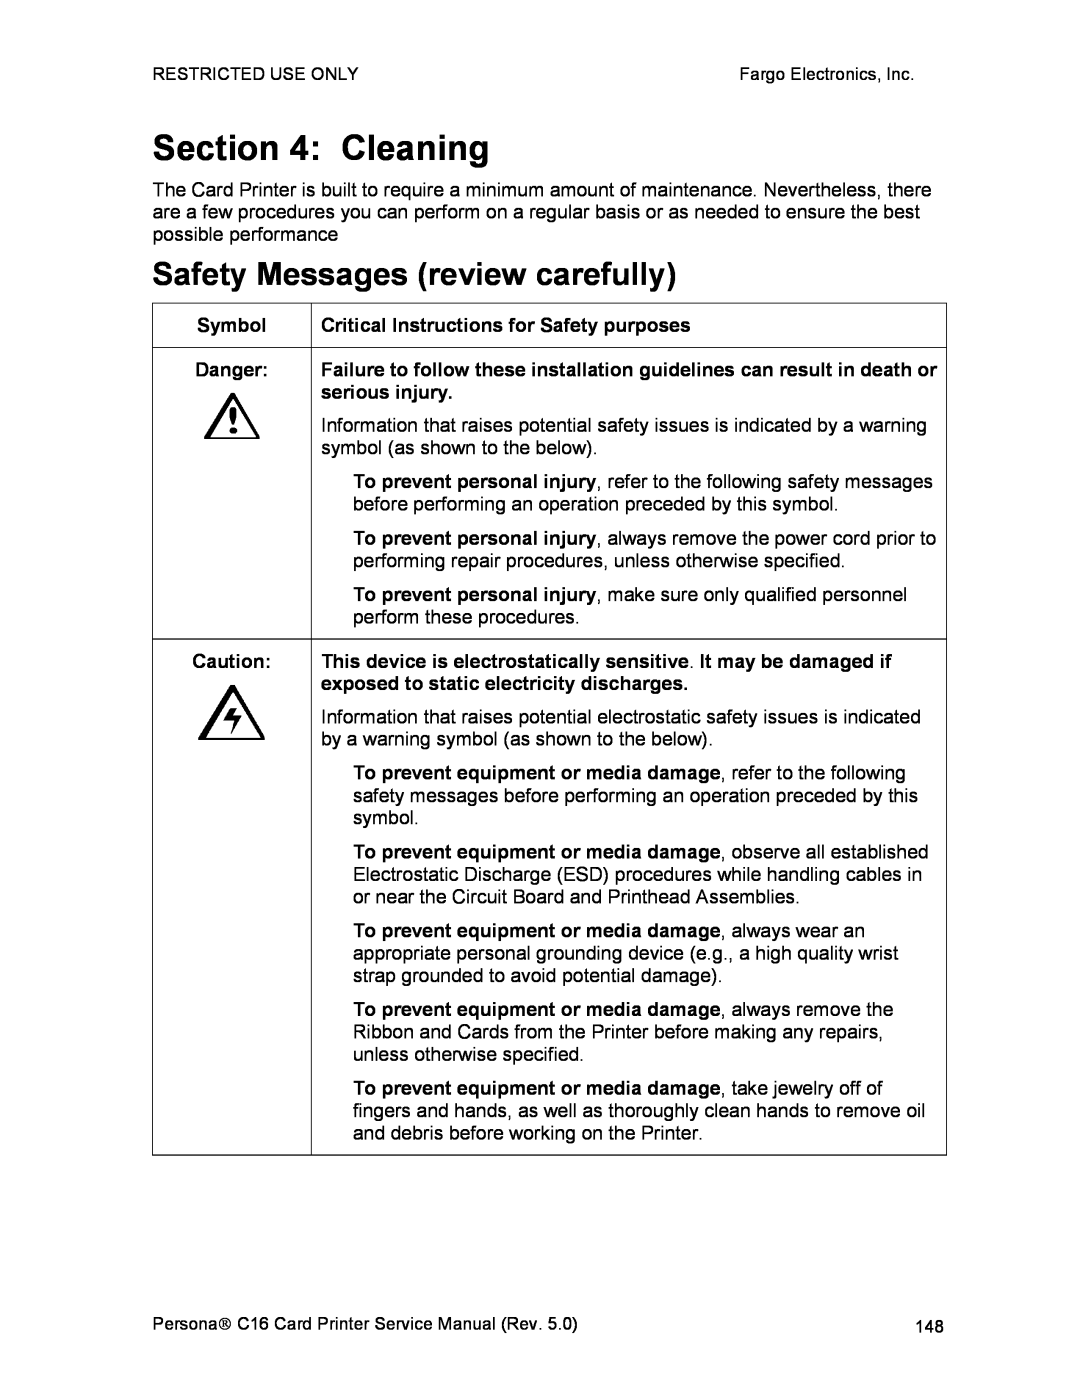 FARGO electronic C16 service manual Cleaning, Safety Messages review carefully 